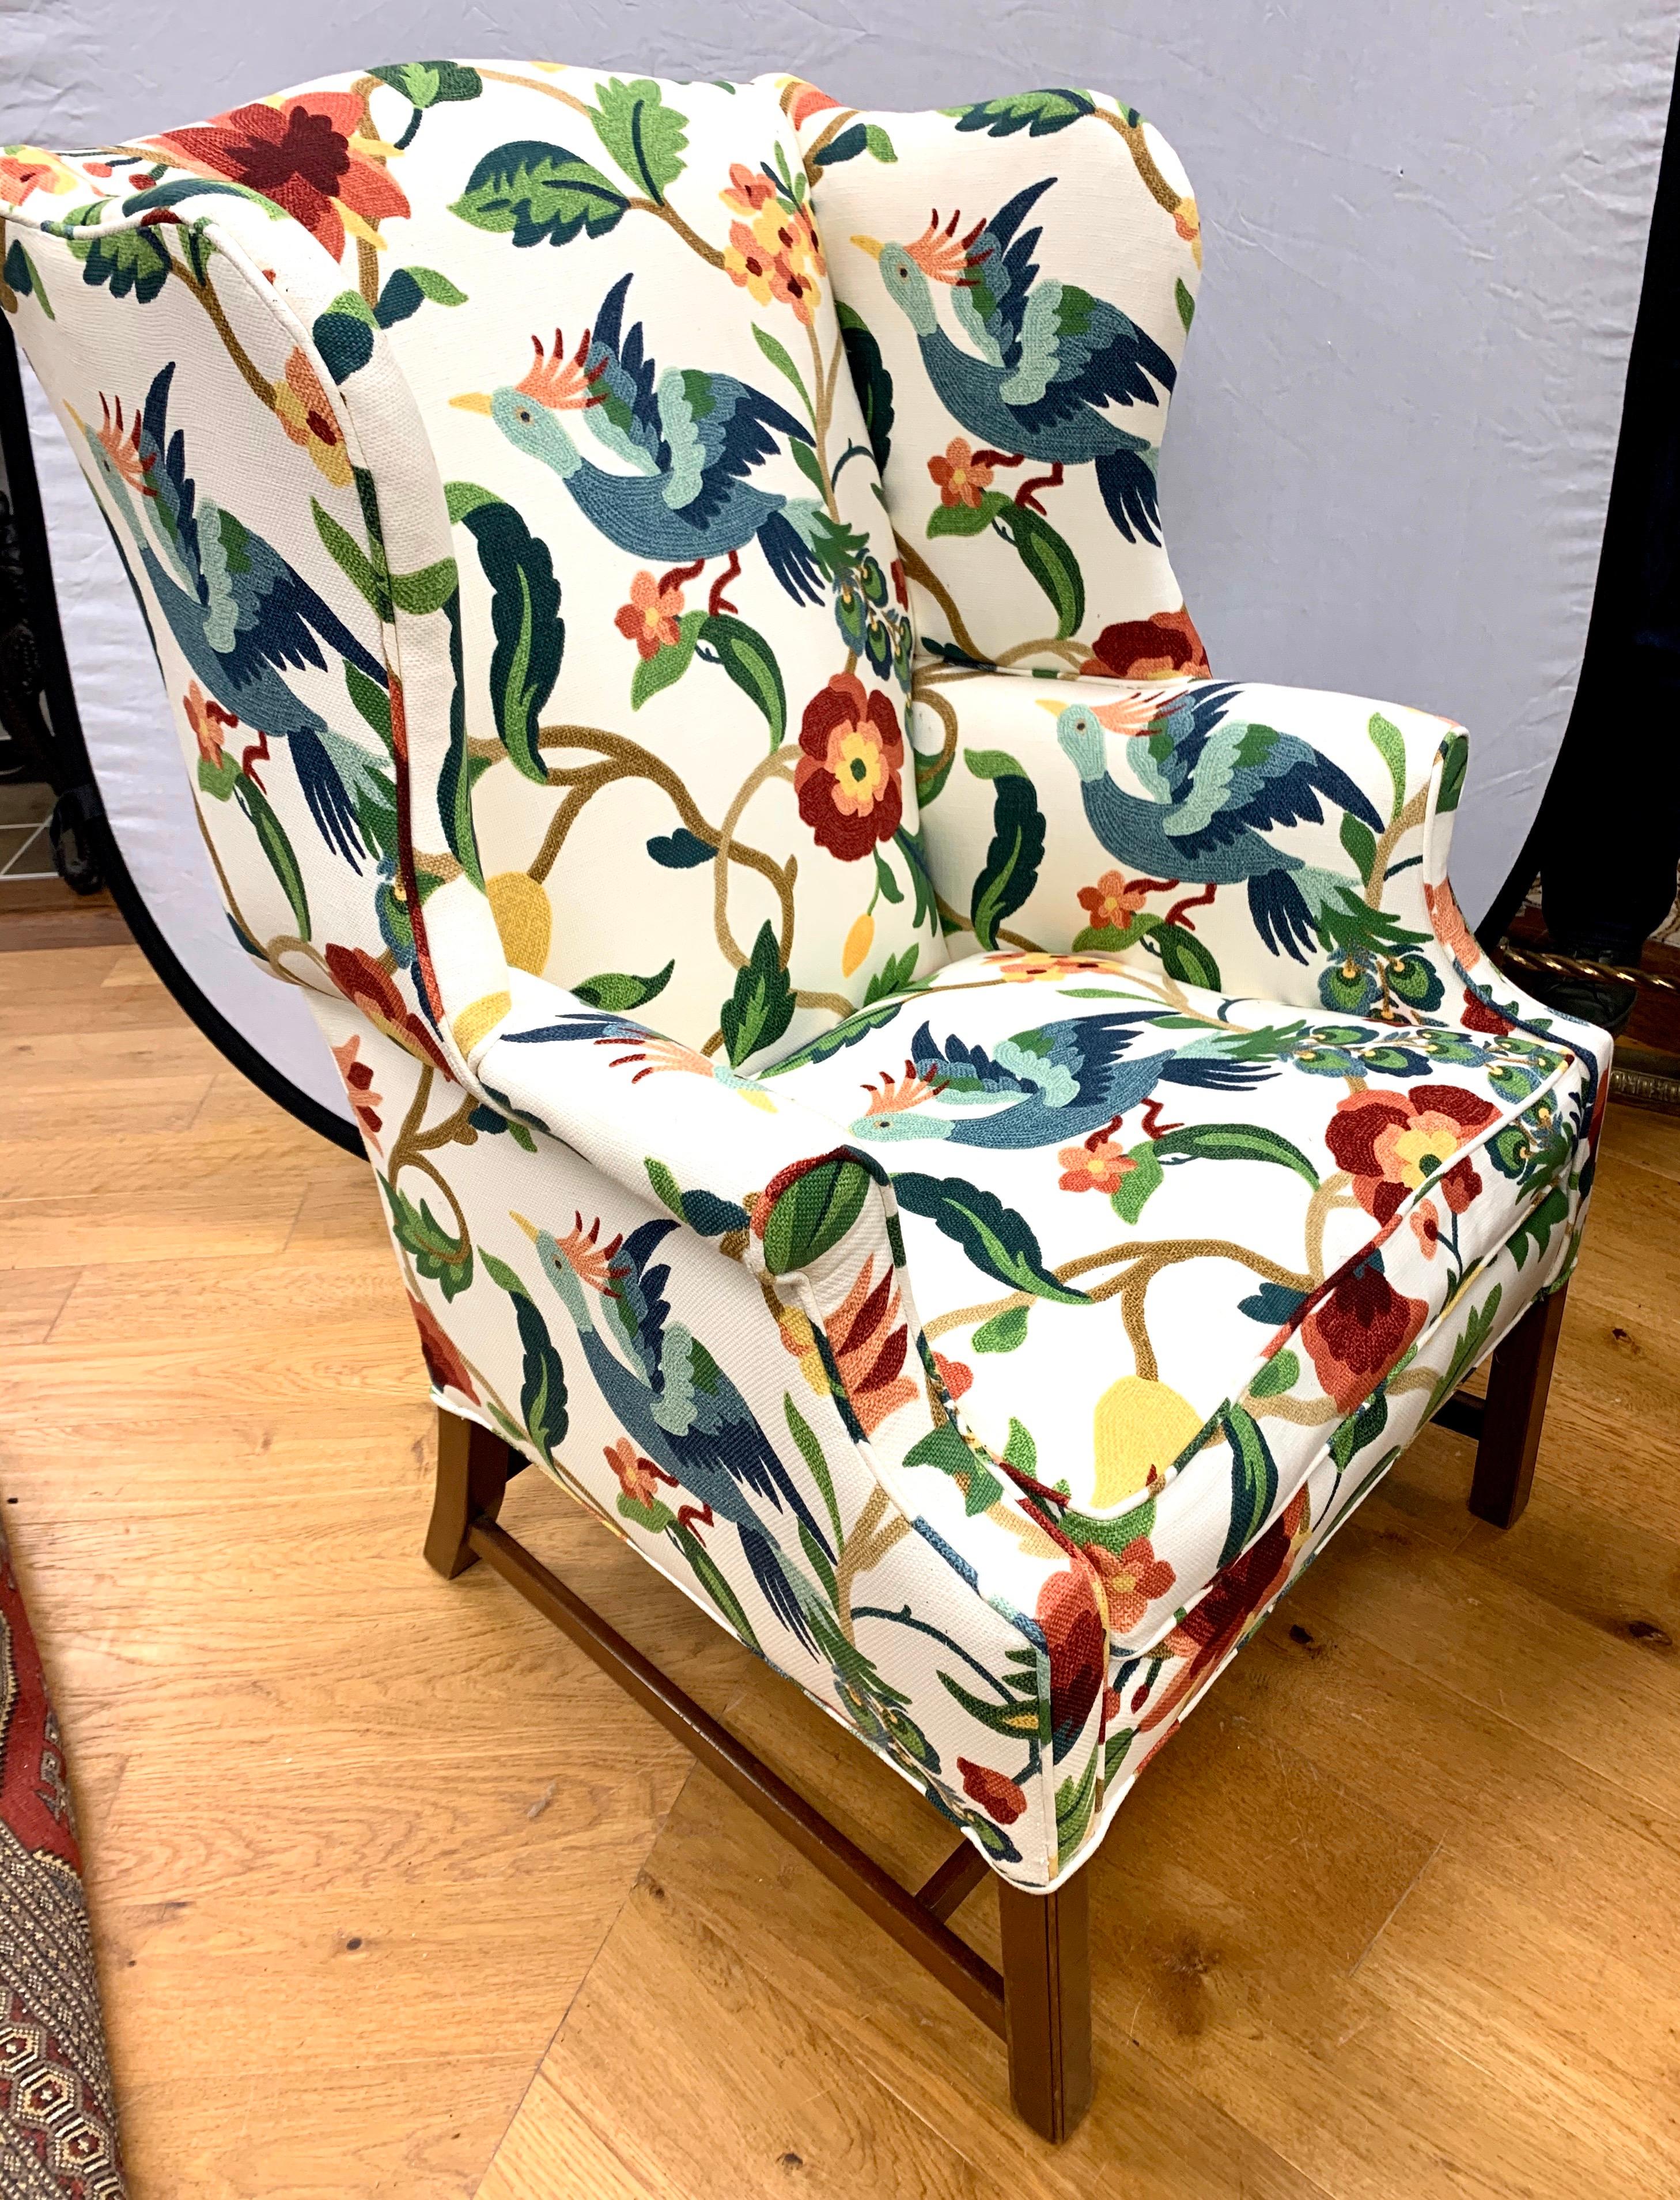 Stunning crewelwork floral upholstered fabric on the large wingback reading chair. The fabric is magnificent.